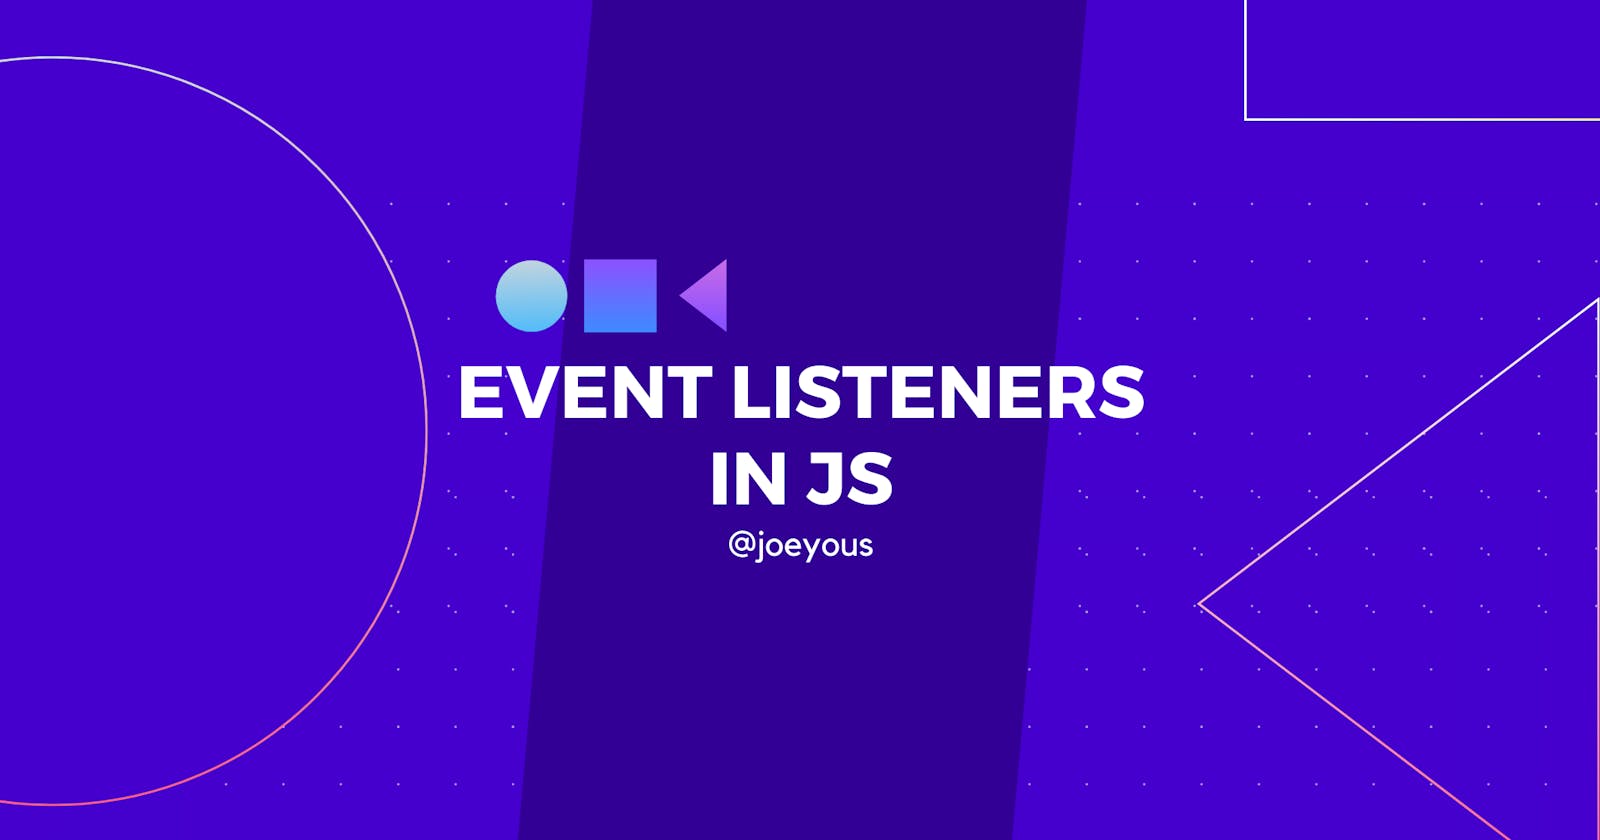 Event Listeners in JS - the advanced concepts